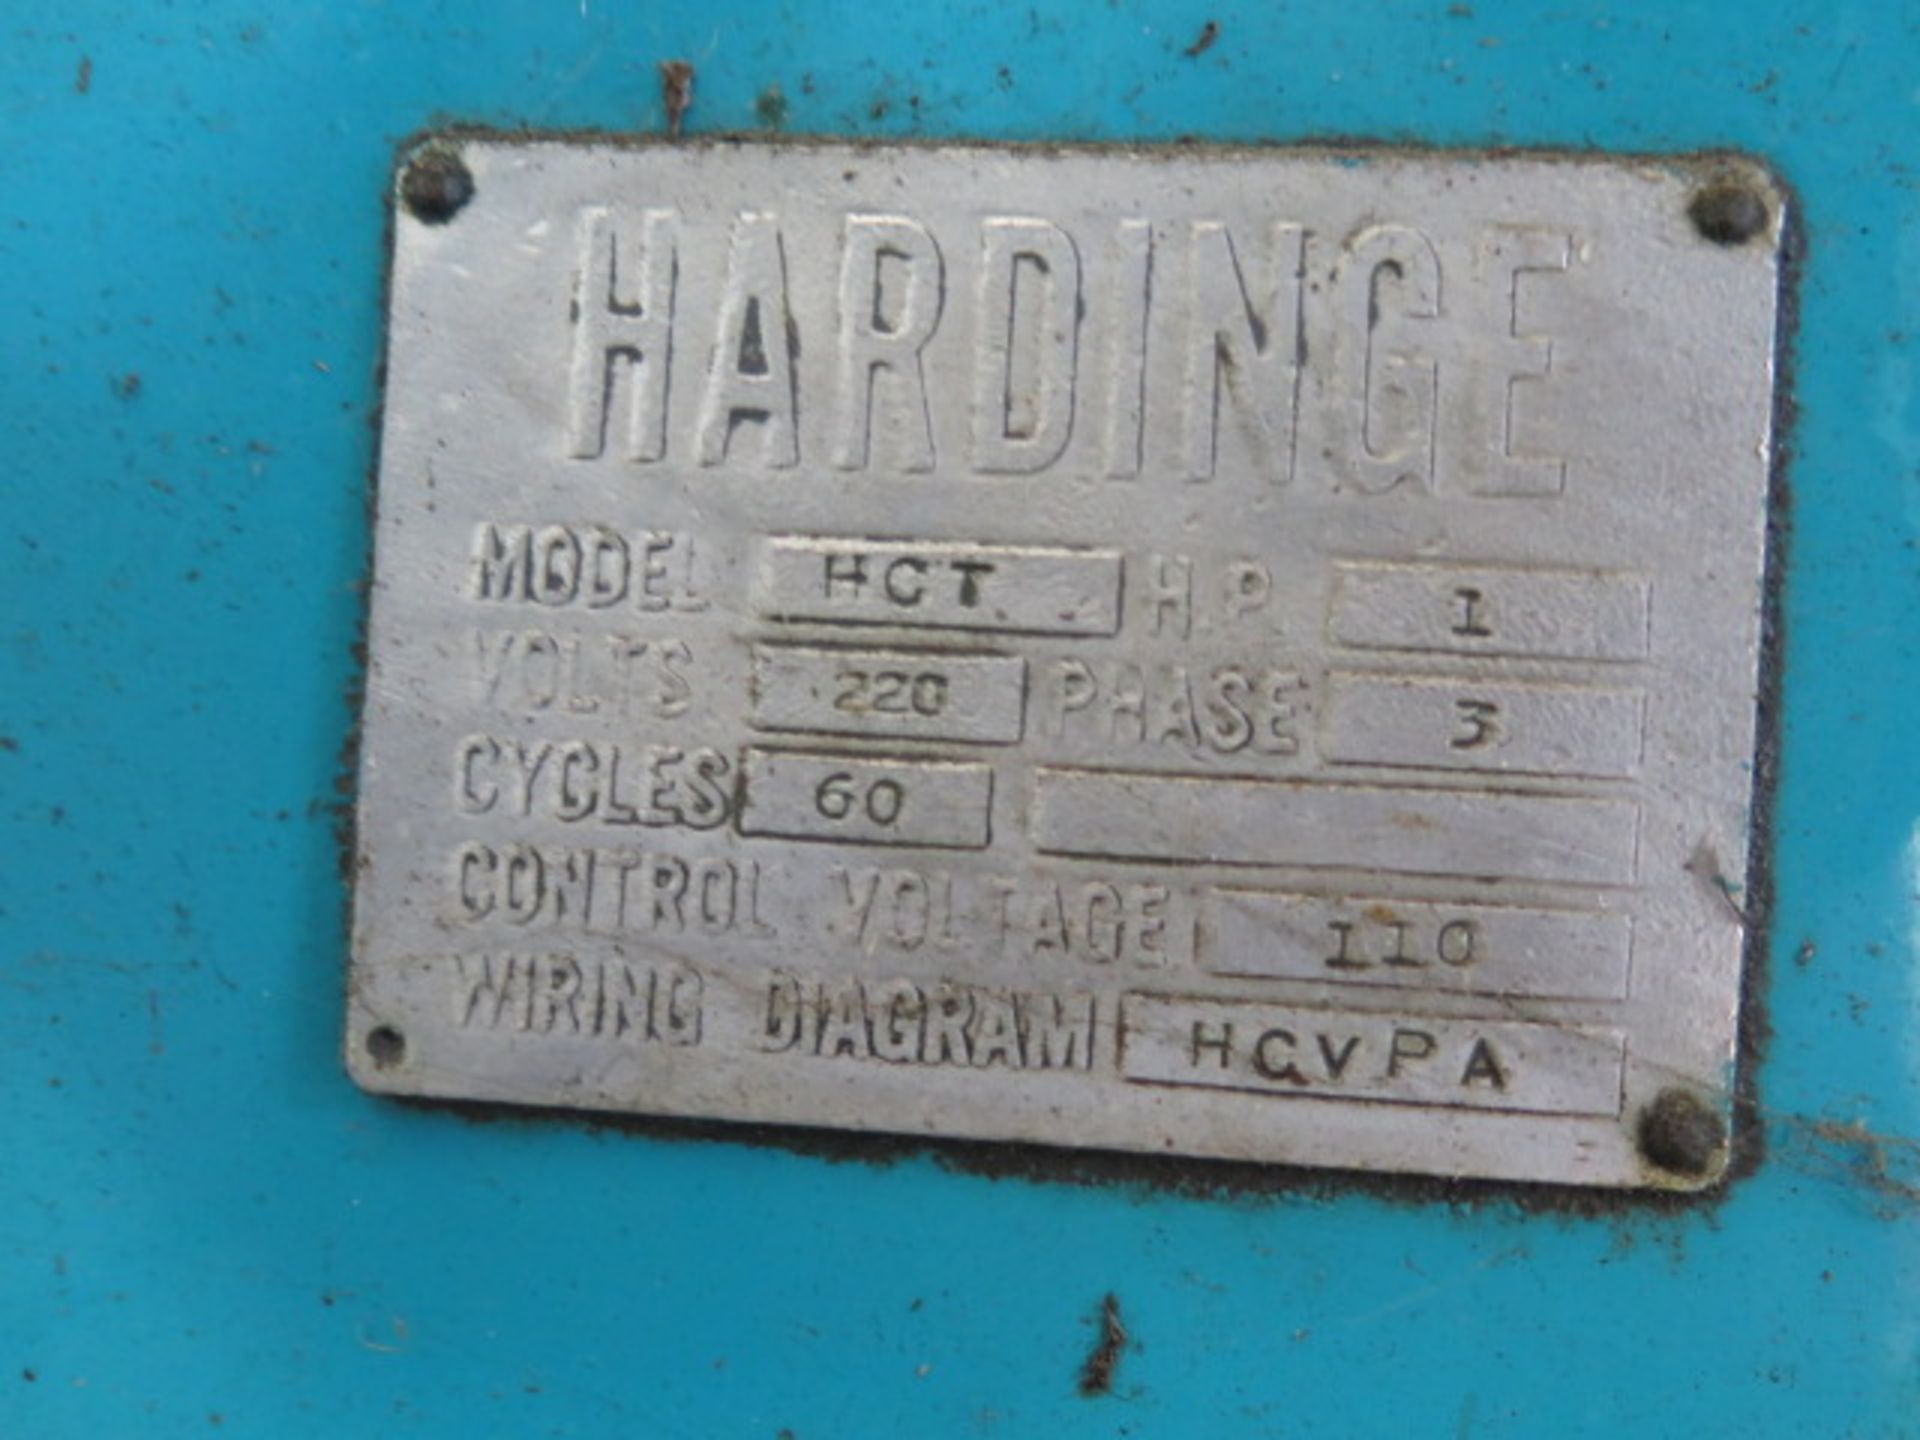 Hardinge HC Hand Chucker s/n 27469 w/ Threading Attachment, 8-Station Turret, Power Feeds,SOLD AS IS - Image 12 of 12